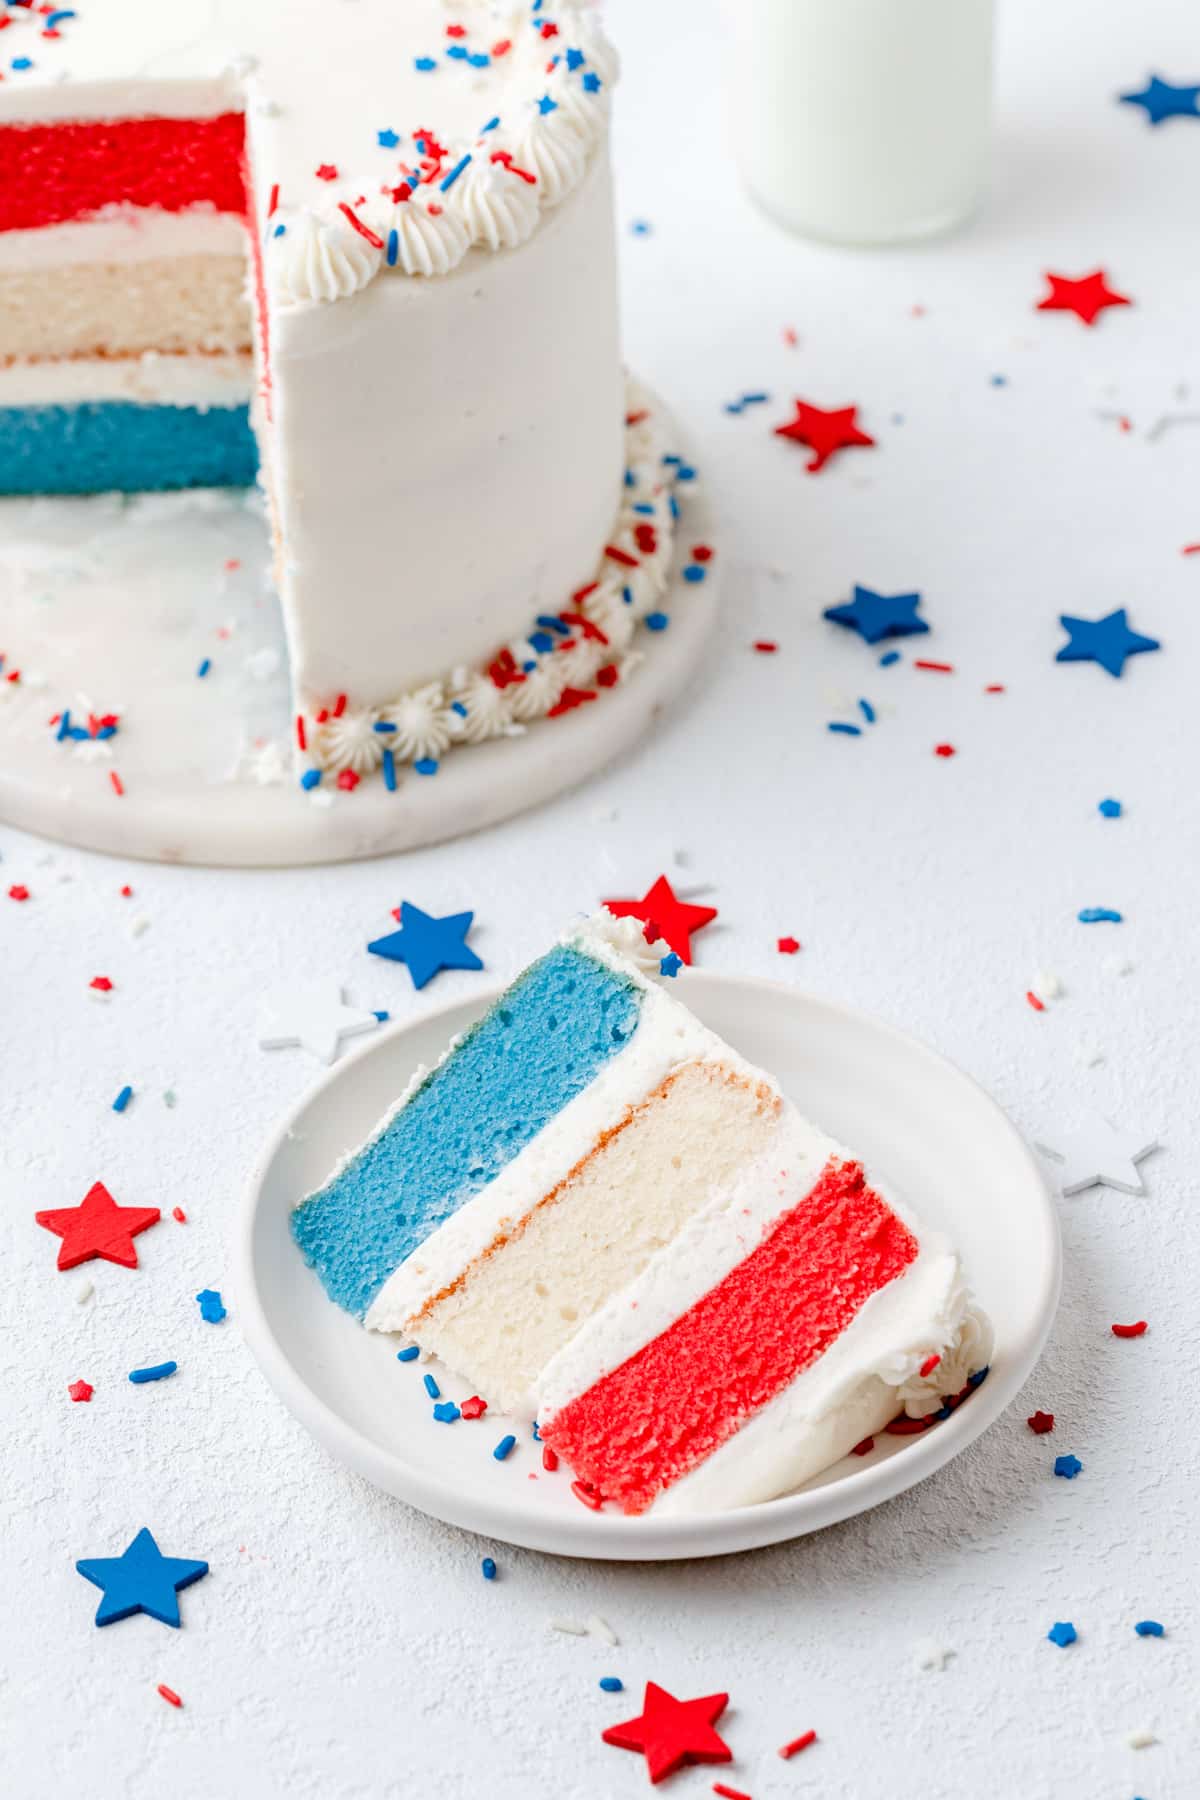 slice of red white and blue layer cake on plate.